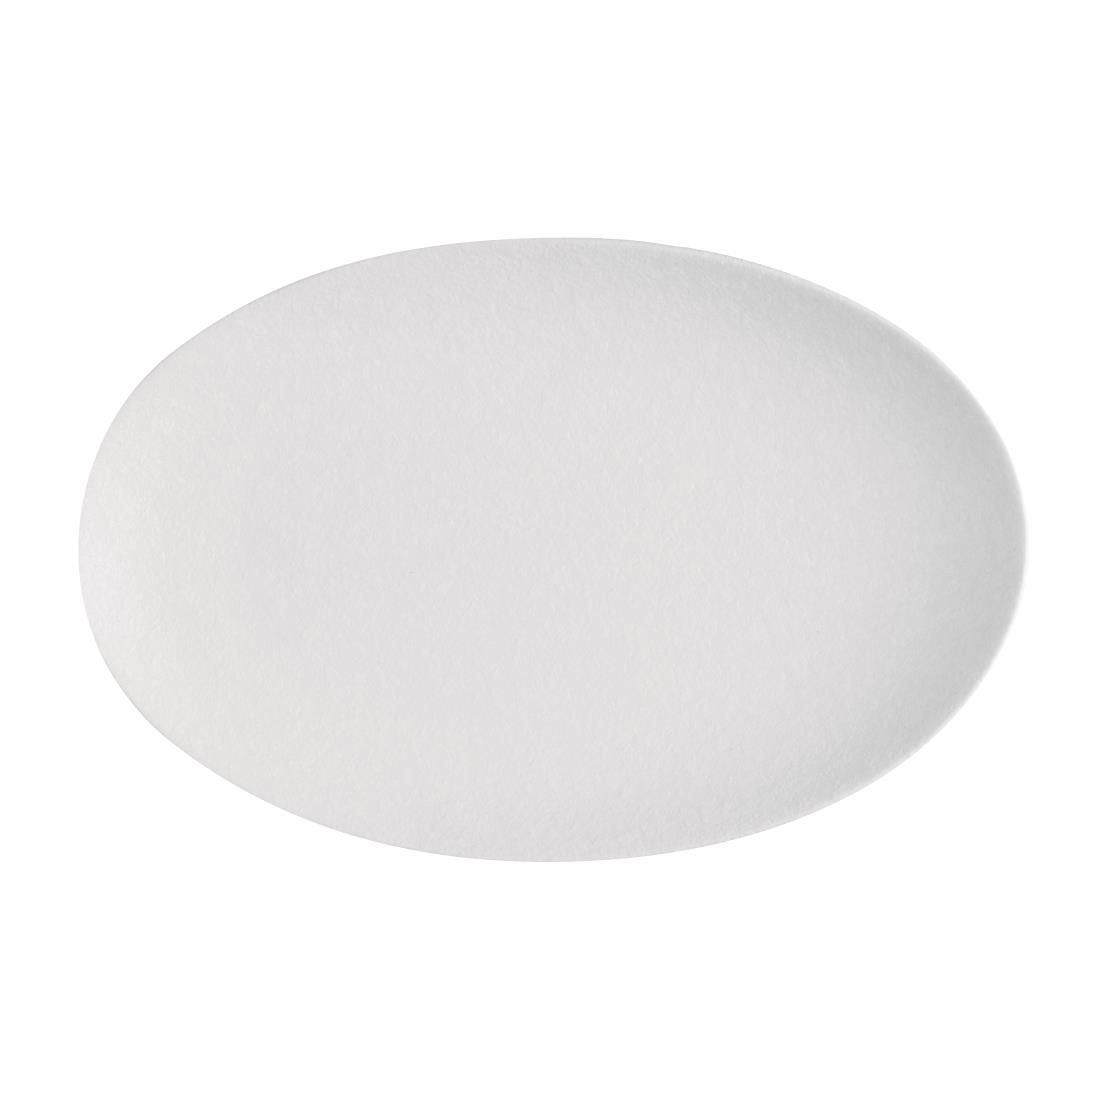 Olympia Salina Oval Plates 305mm (Pack of 4)